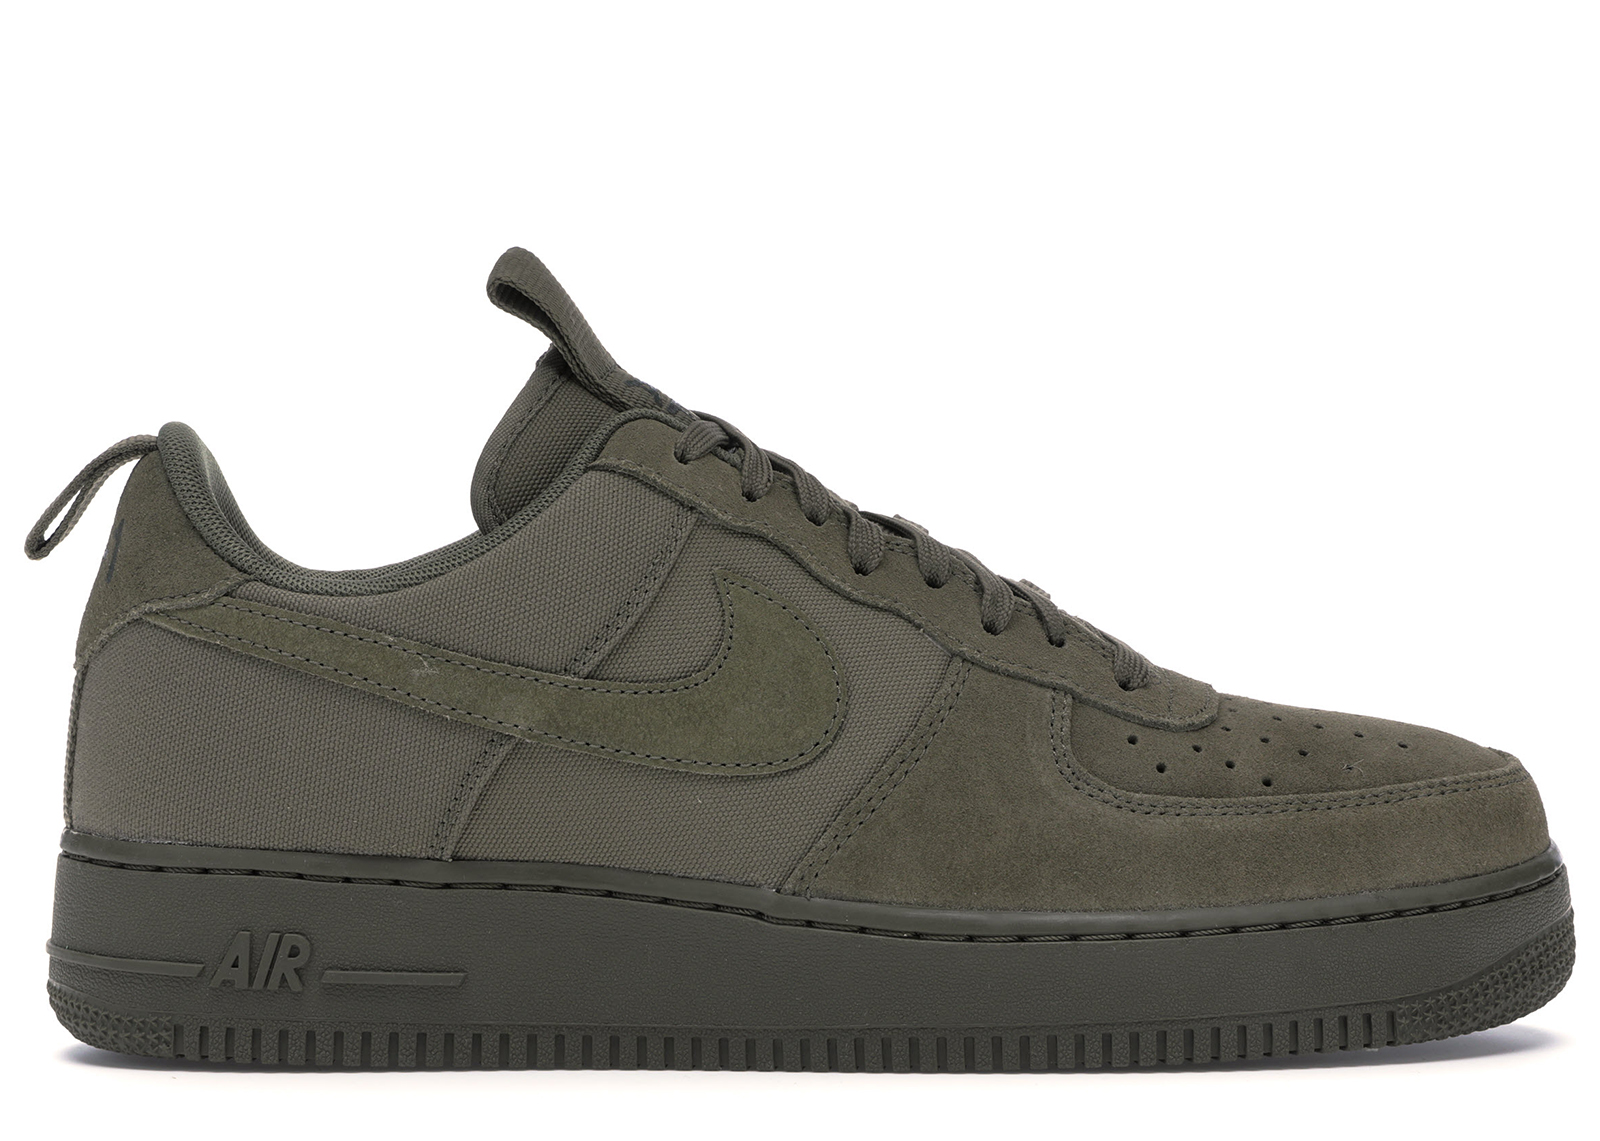 Nike Air Force 1 Low Canvas Medium Olive